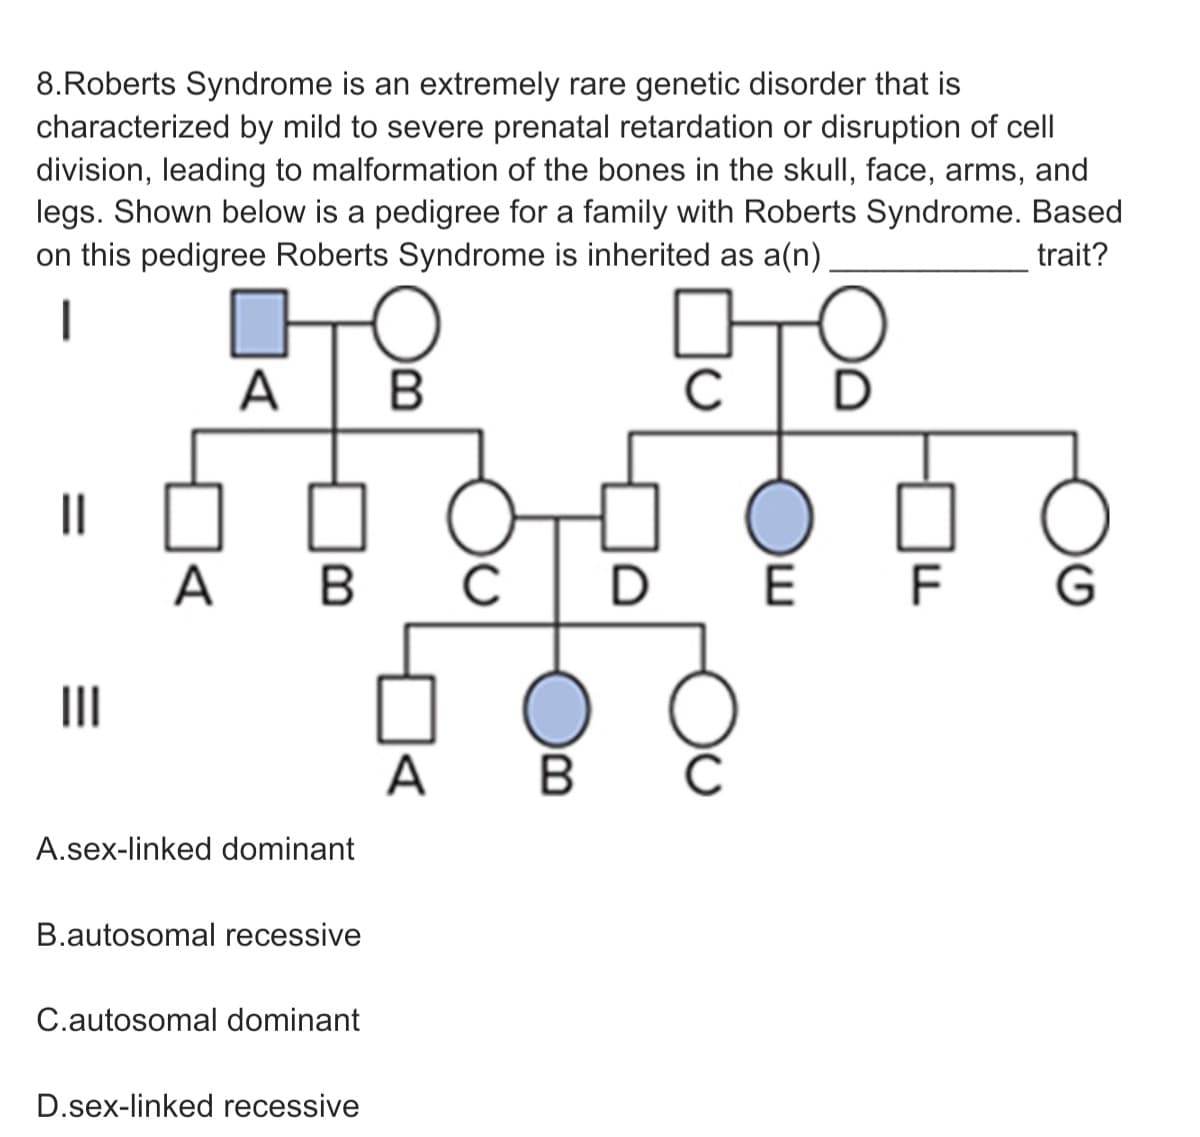 8.Roberts Syndrome is an extremely rare genetic disorder that is
characterized by mild to severe prenatal retardation or disruption of cell
division, leading to malformation of the bones in the skull, face, arms, and
legs. Shown below is a pedigree for a family with Roberts Syndrome. Based
on this pedigree Roberts Syndrome is inherited as a(n)
trait?
A
||
A B
D E F G
II
A
A.sex-linked dominant
B.autosomal recessive
C.autosomal dominant
D.sex-linked recessive
